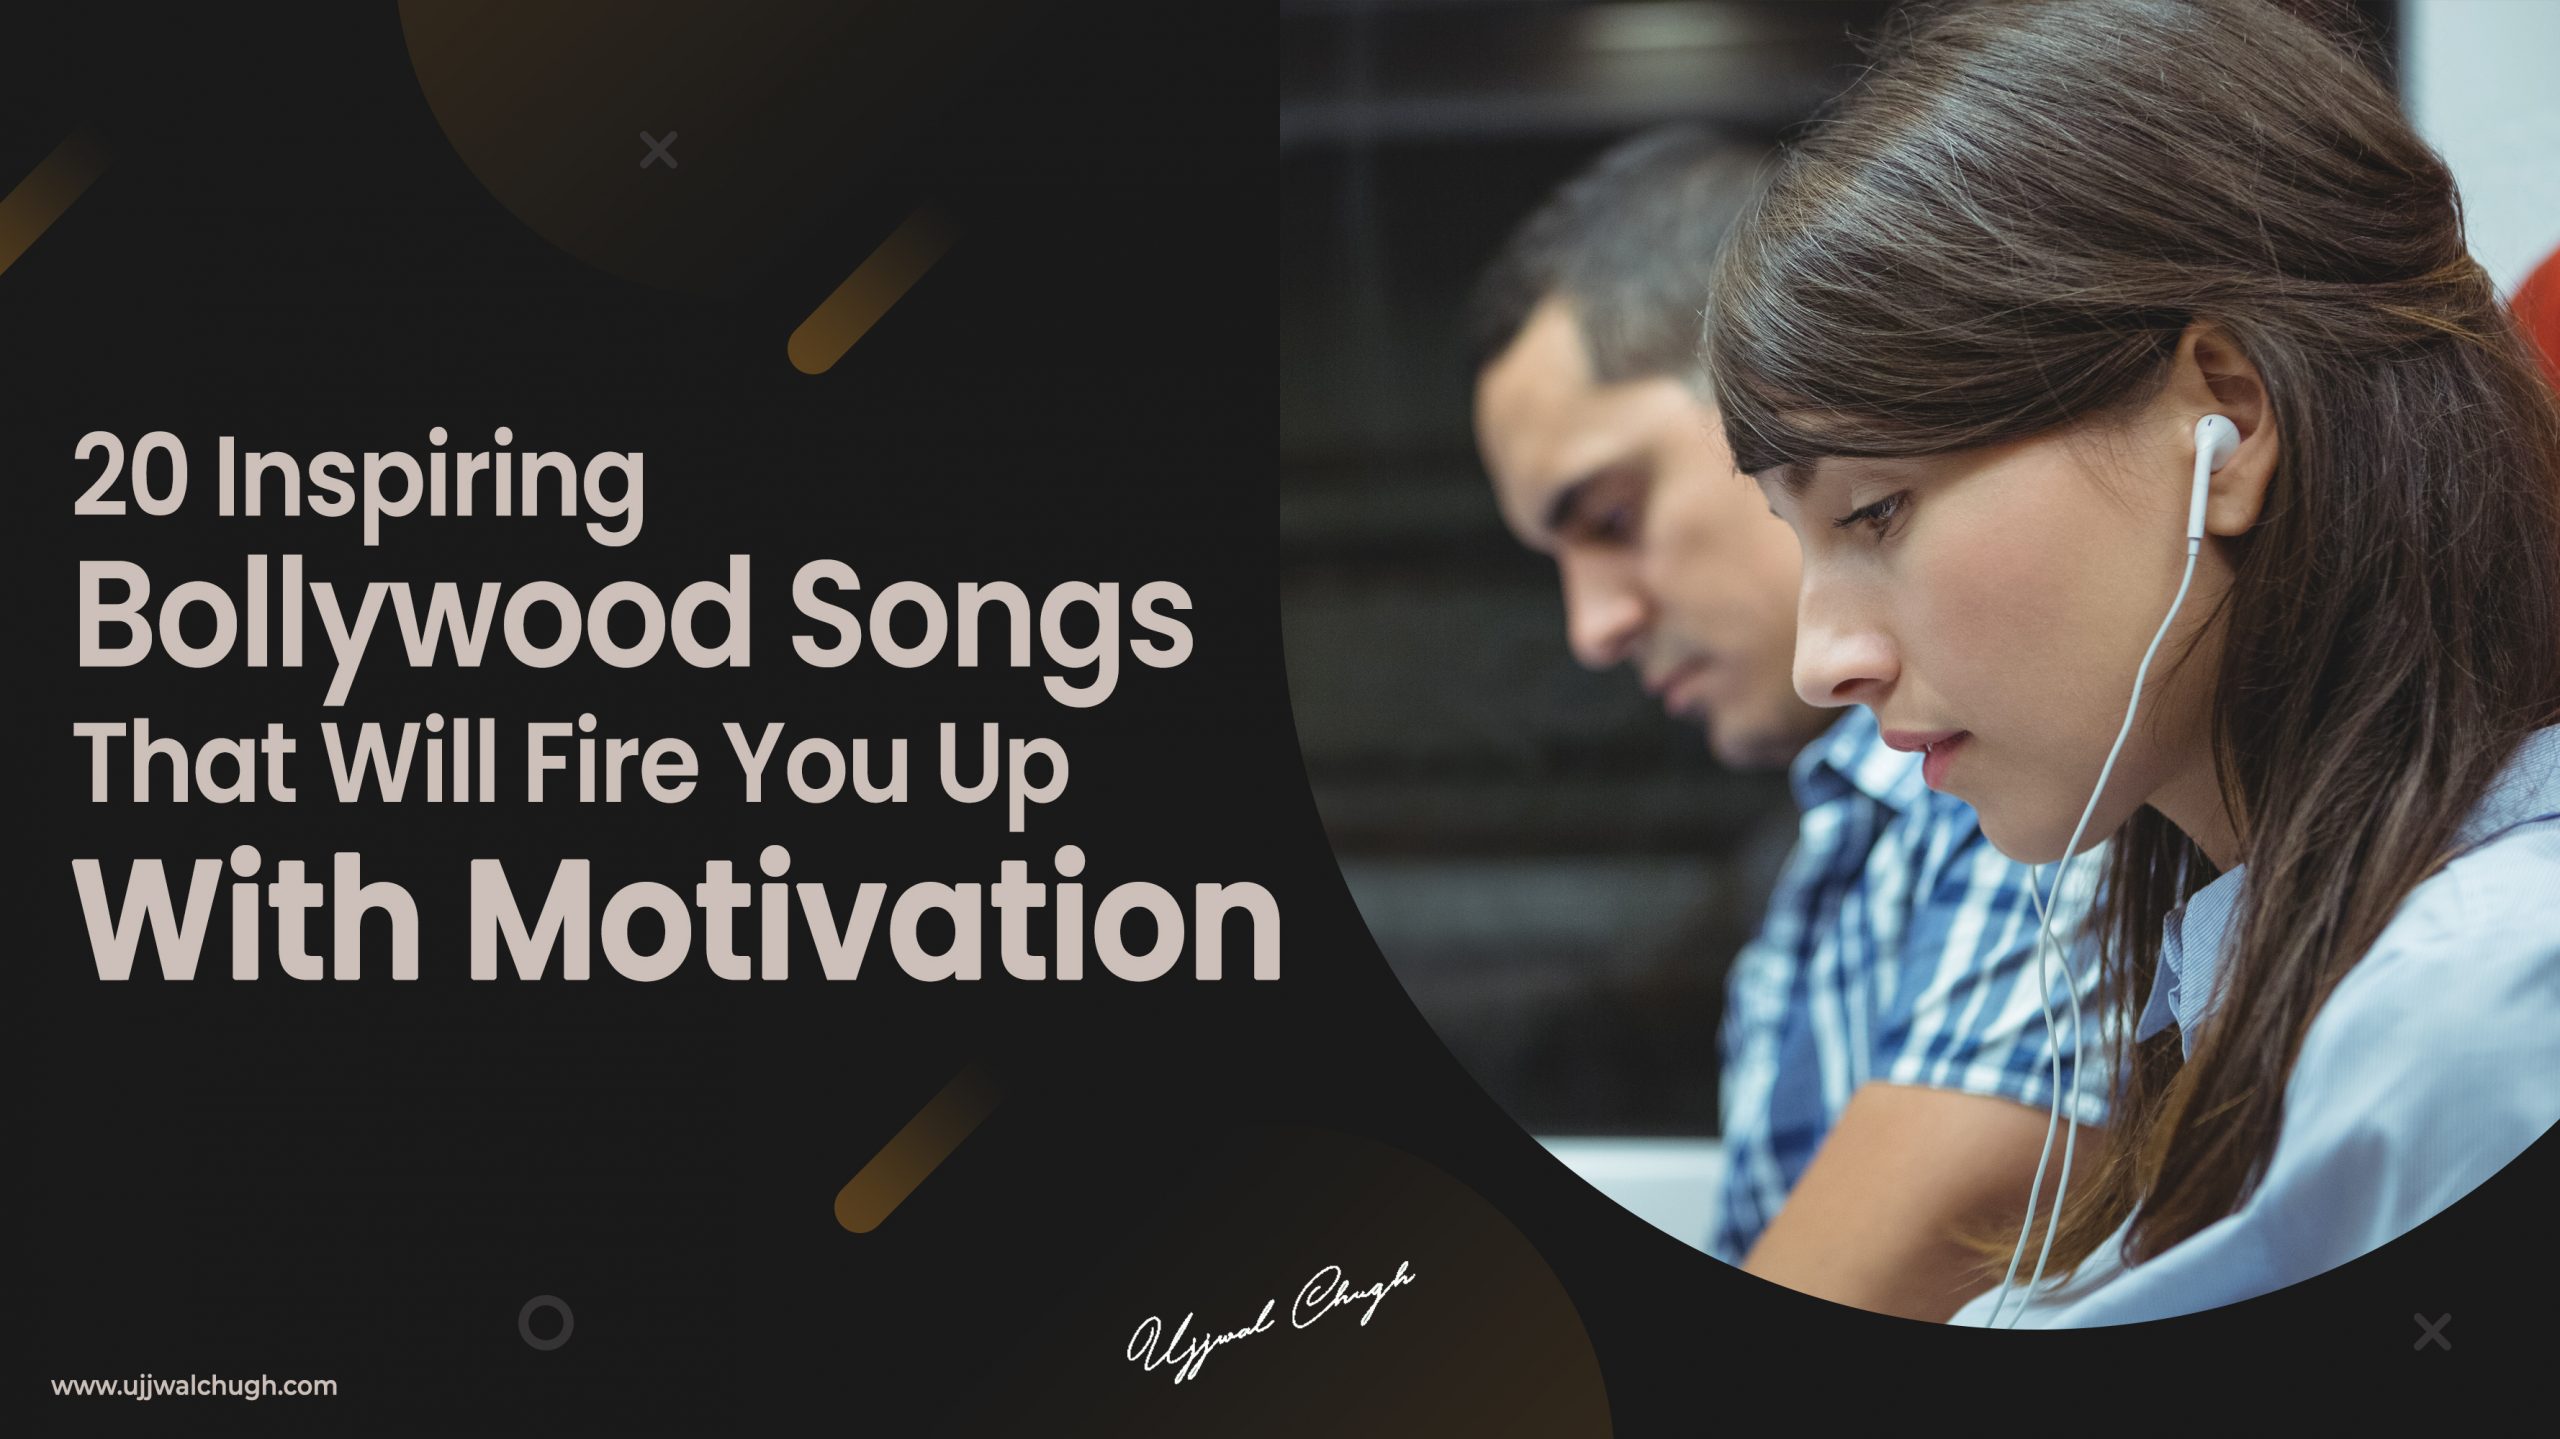 20 Inspiring Bollywood Songs That Will Fire You Up With Motivation